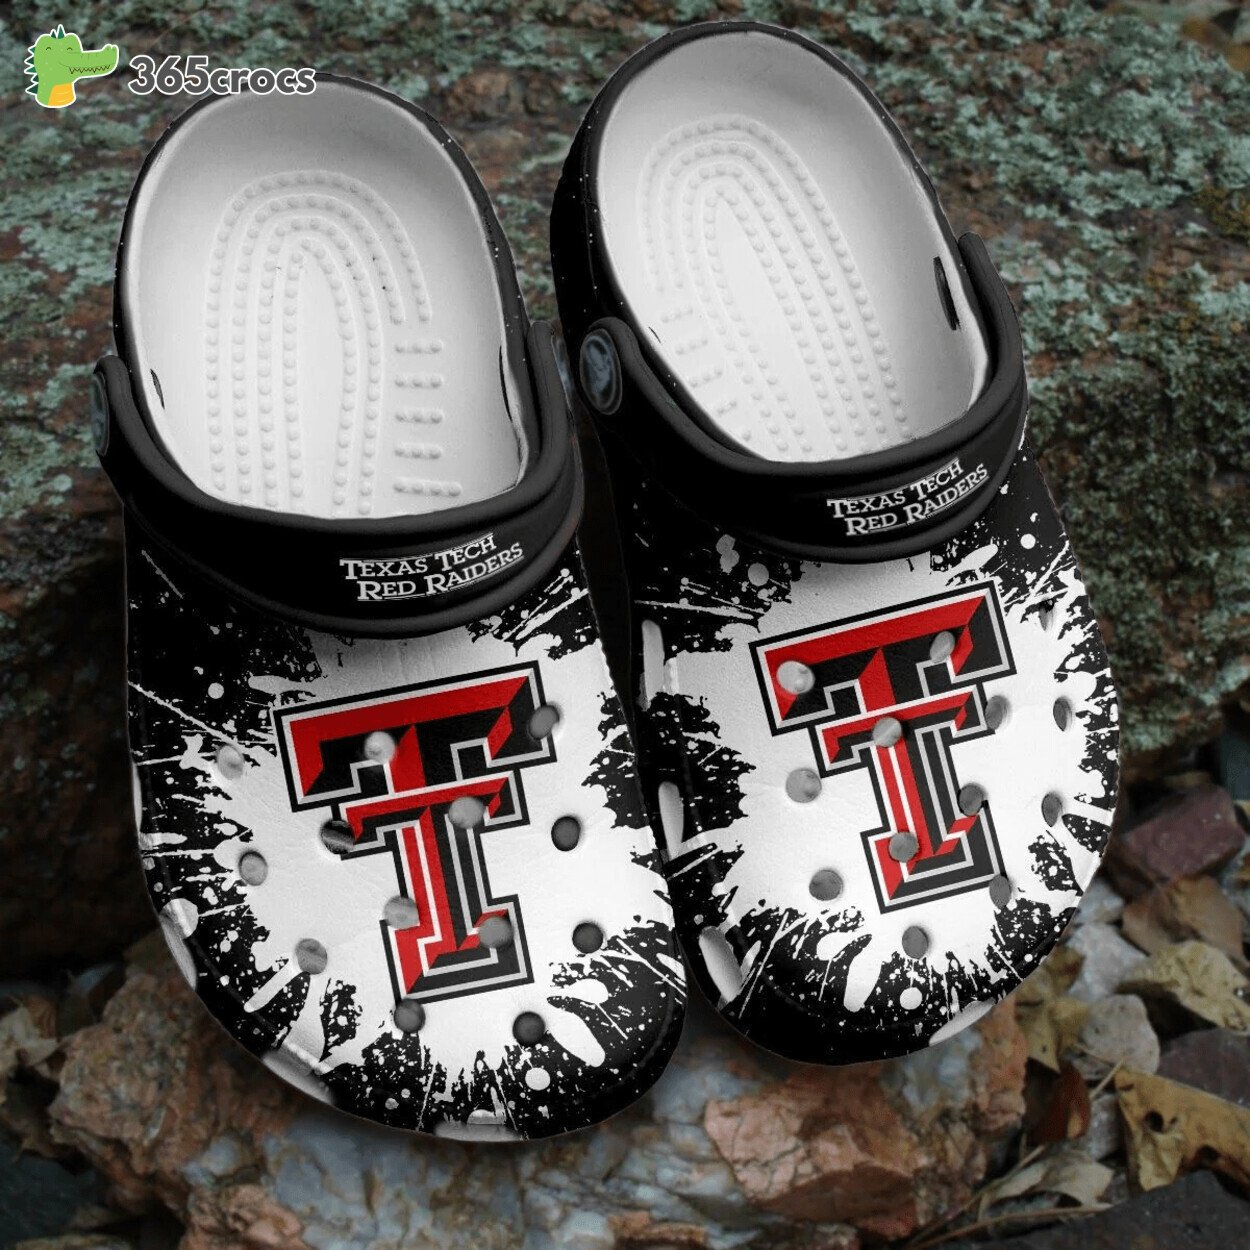 Texas Tech Red Raiders NCAA Crocss Shoes Clogs Comfortable